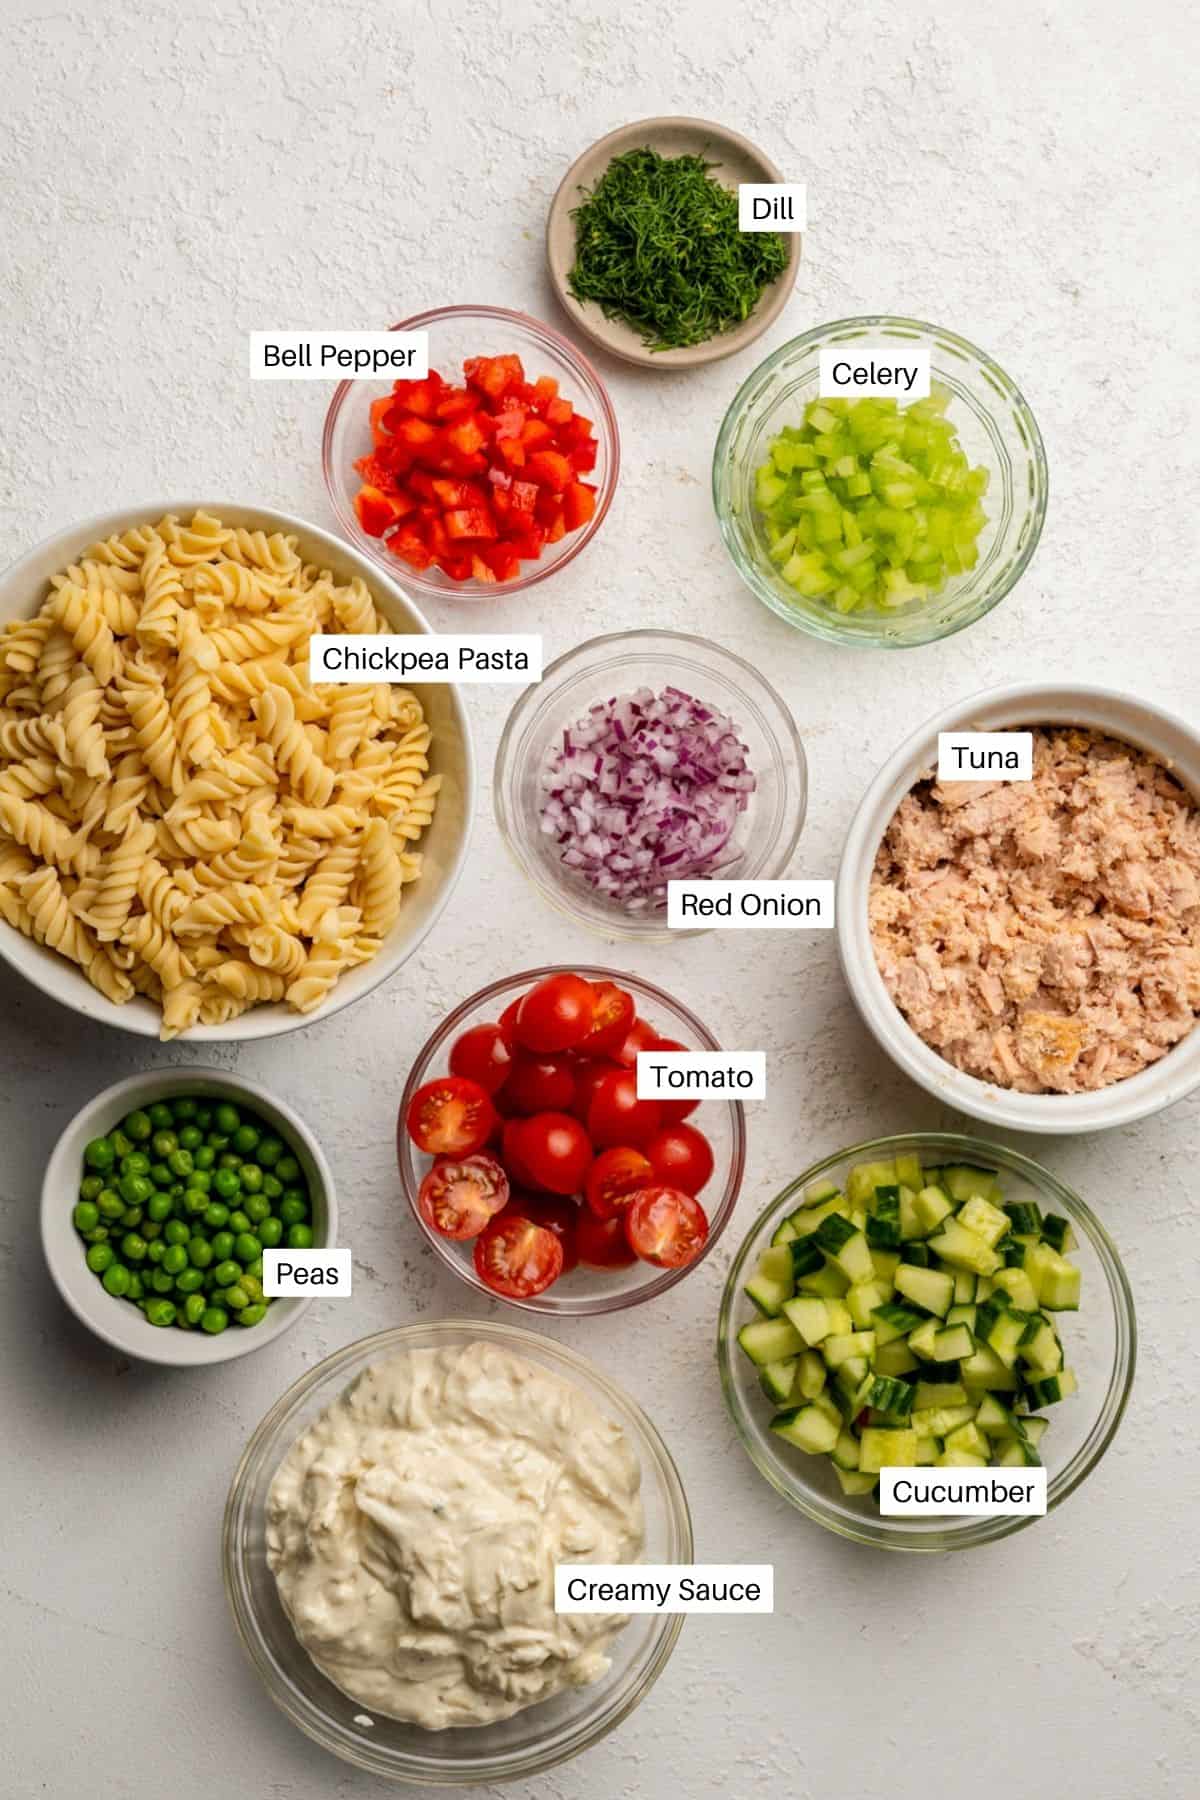 Dill, bell pepper, celery, chickpea pasta, red onion, canned tuna drained, tomtato, cucumber, peas and a creamy sauce for the salad laid out. 